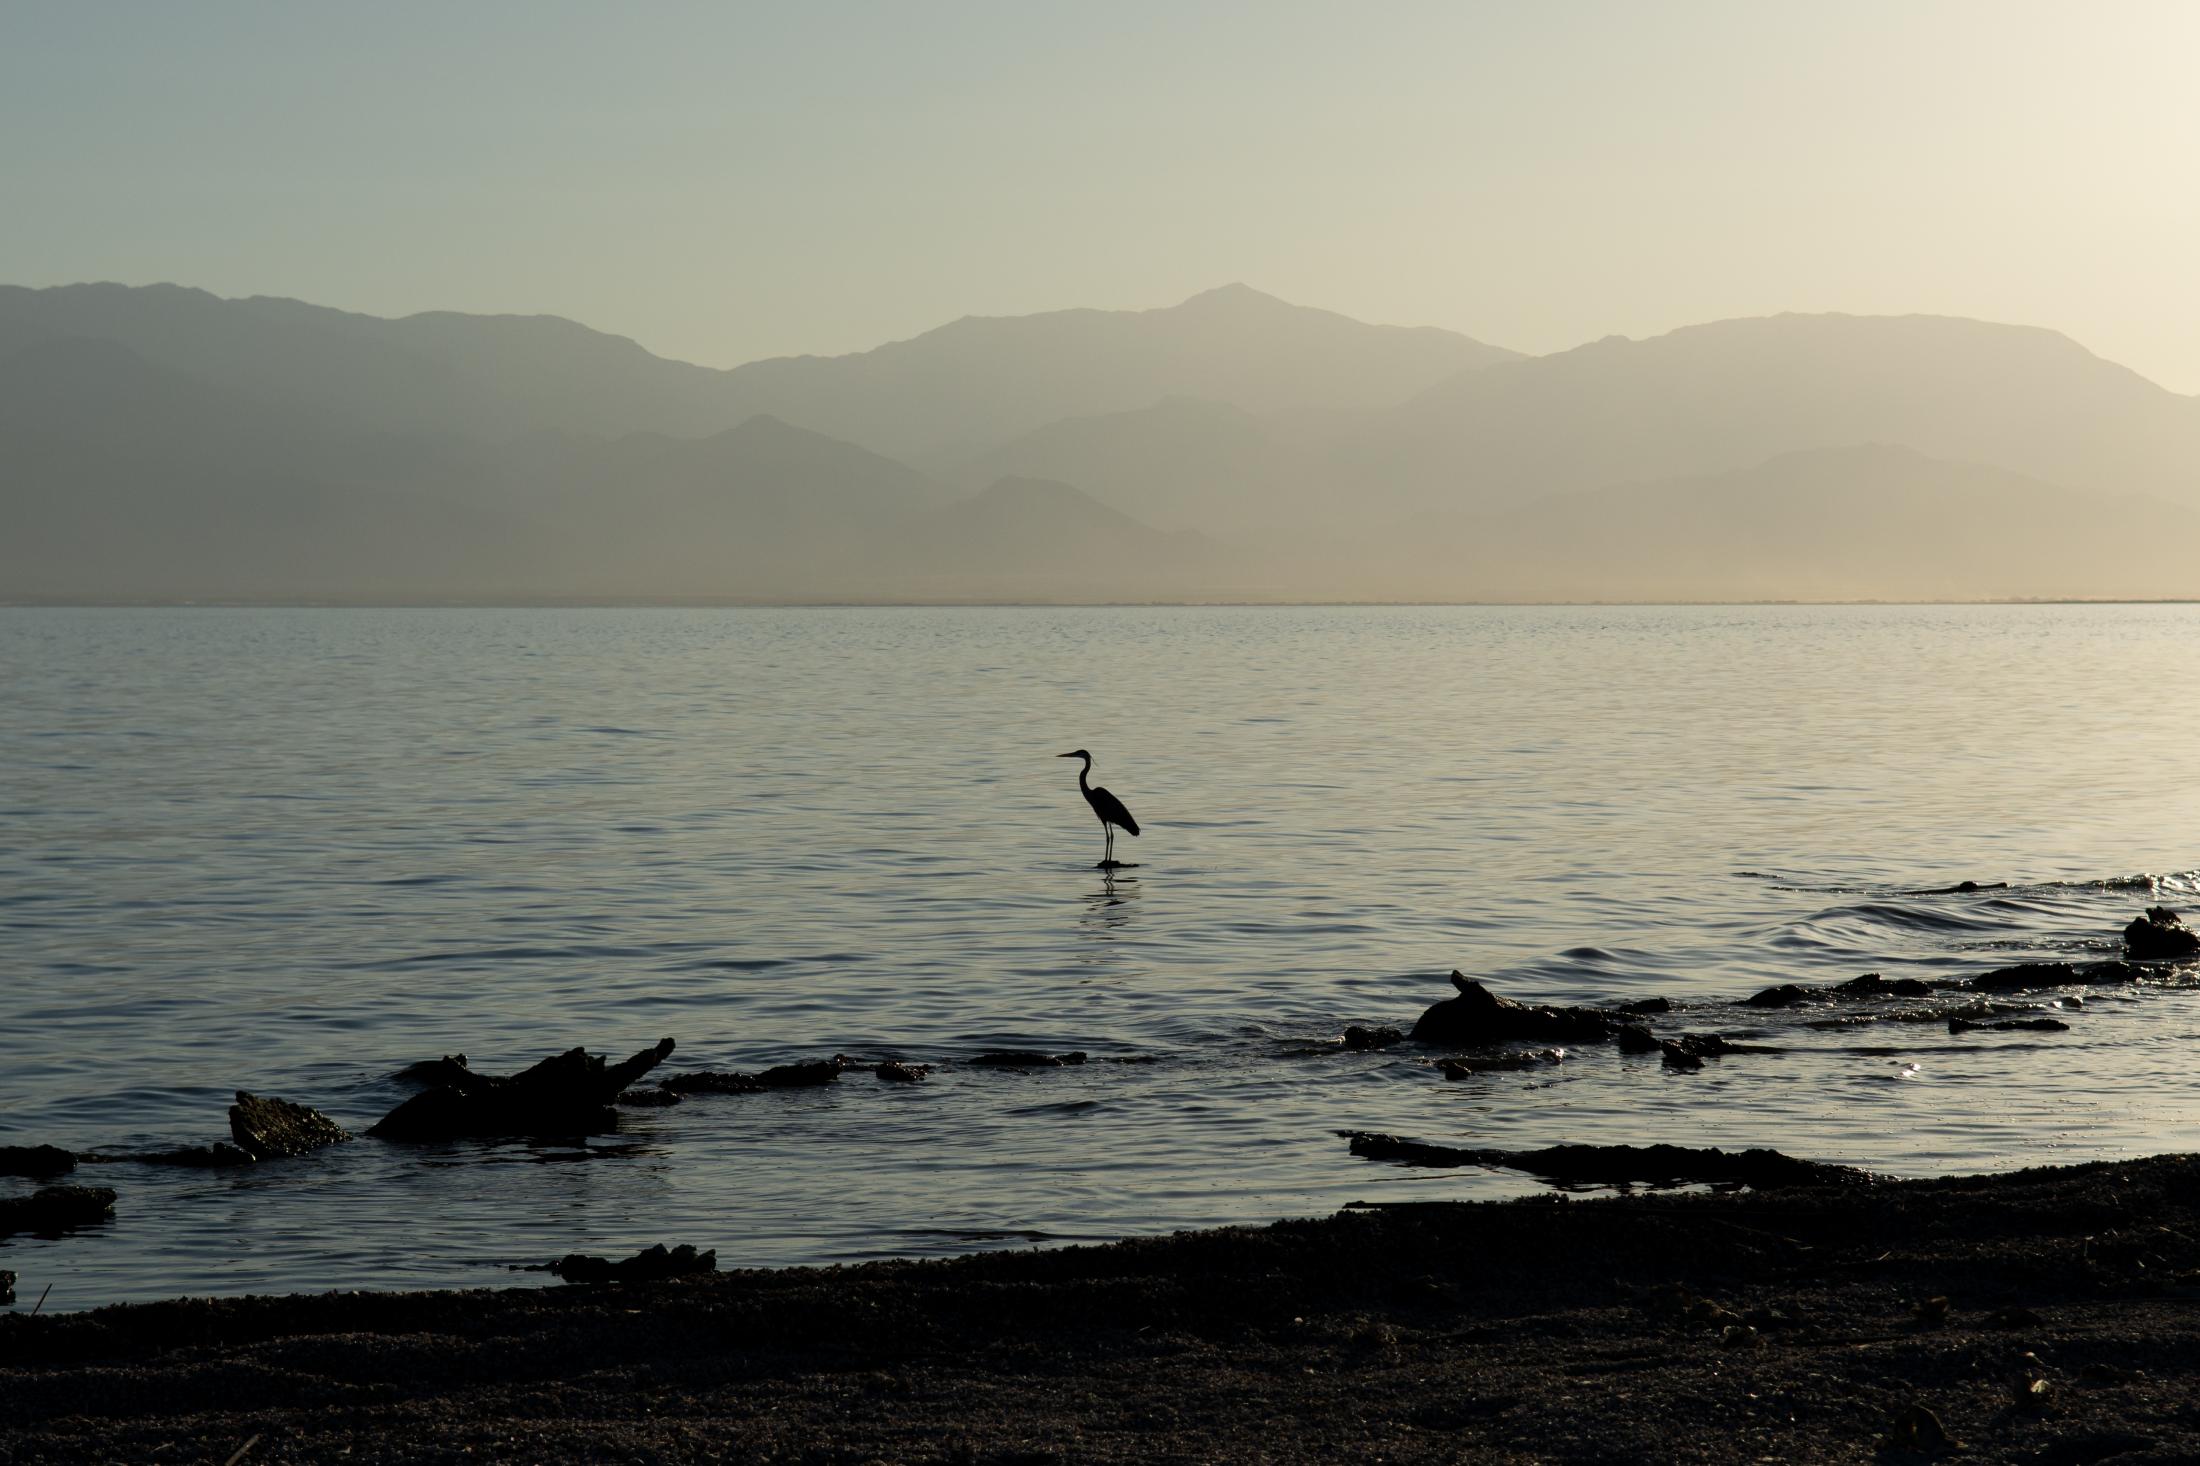 Last Free Place - A crane stands in the water of the Salton Sea. The sea...